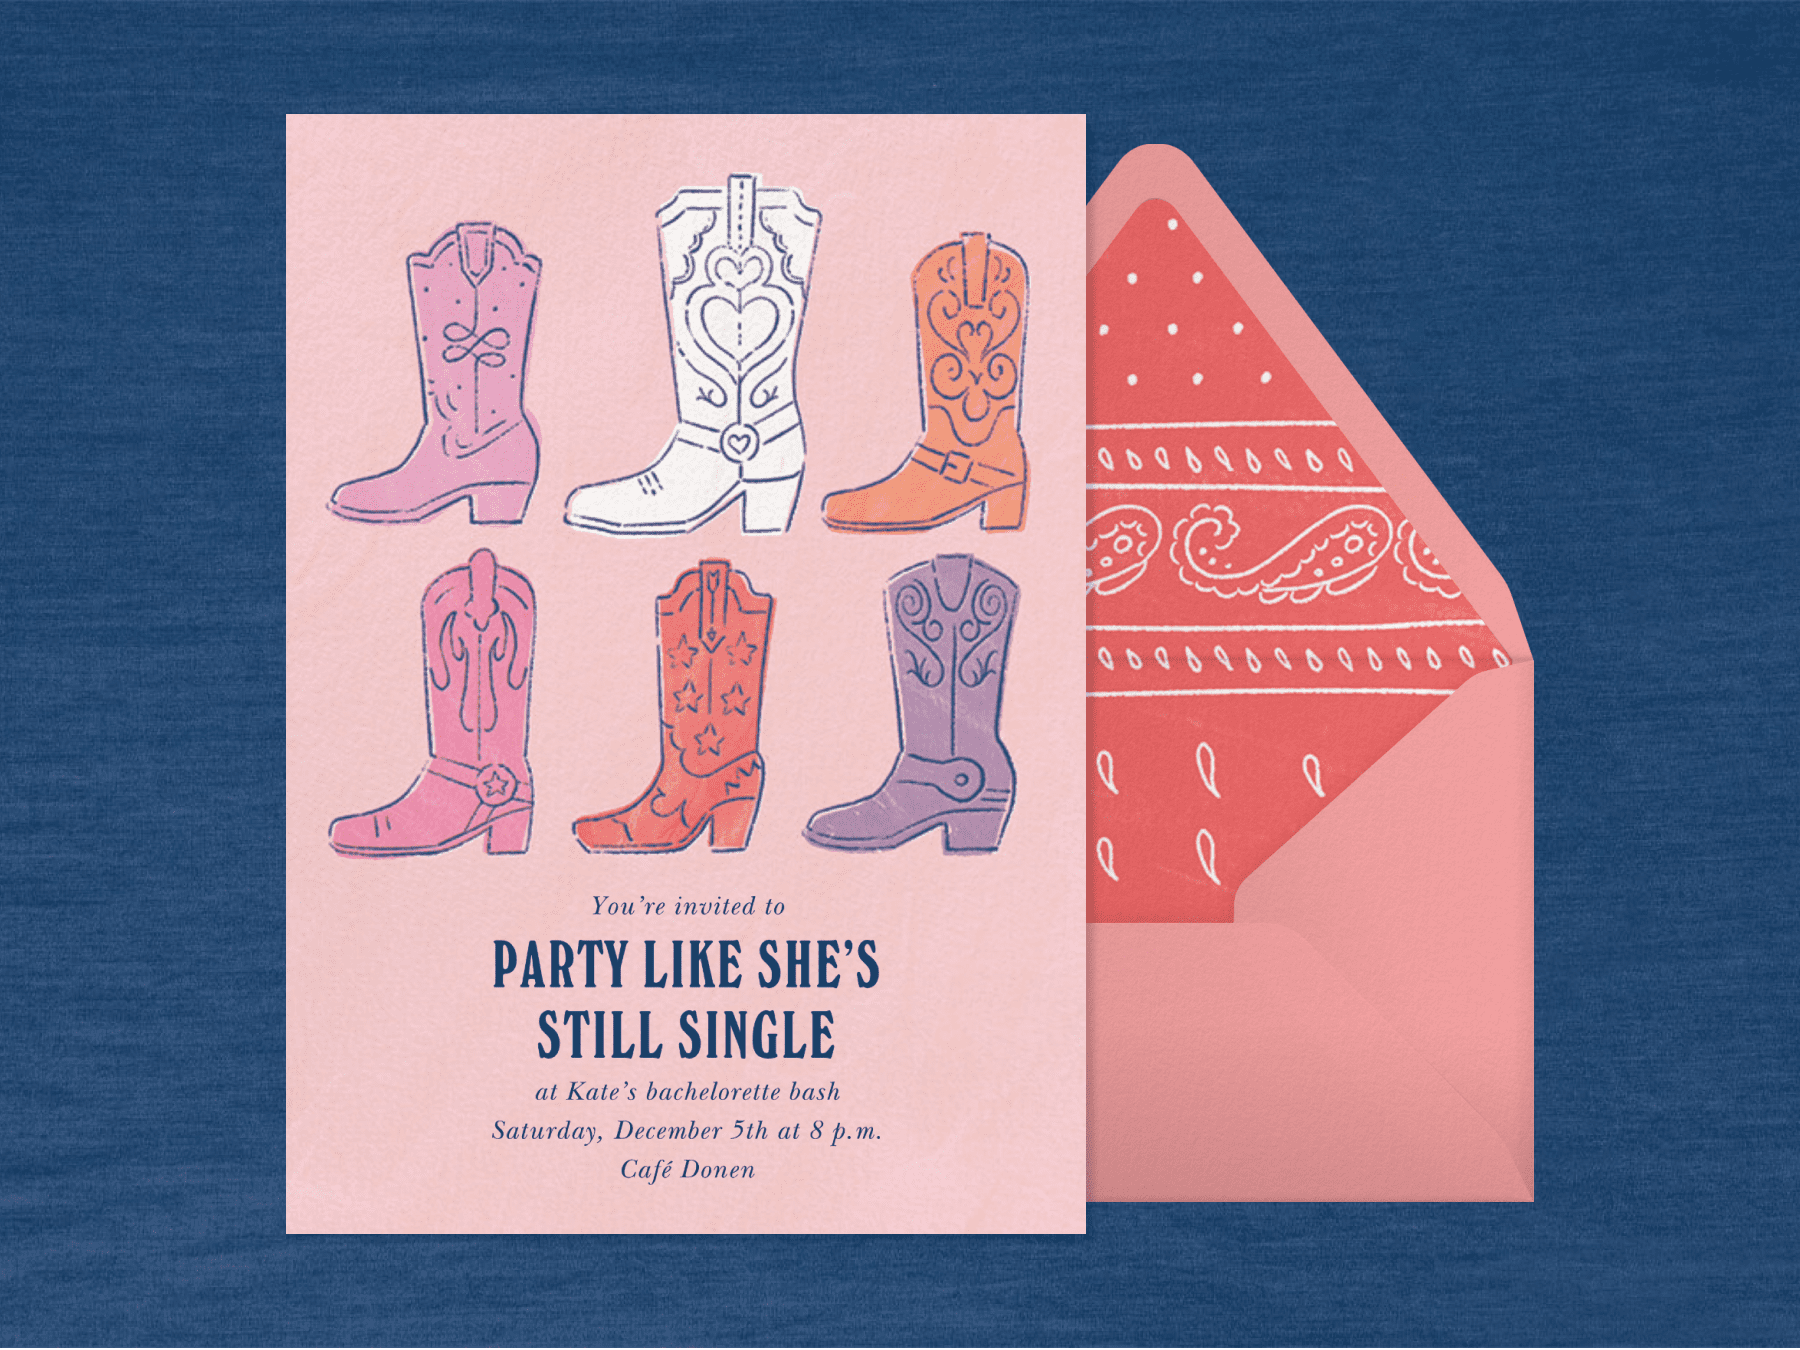 A pink bachelorette invitation with illustrations of six cowgirl boots in various colors.